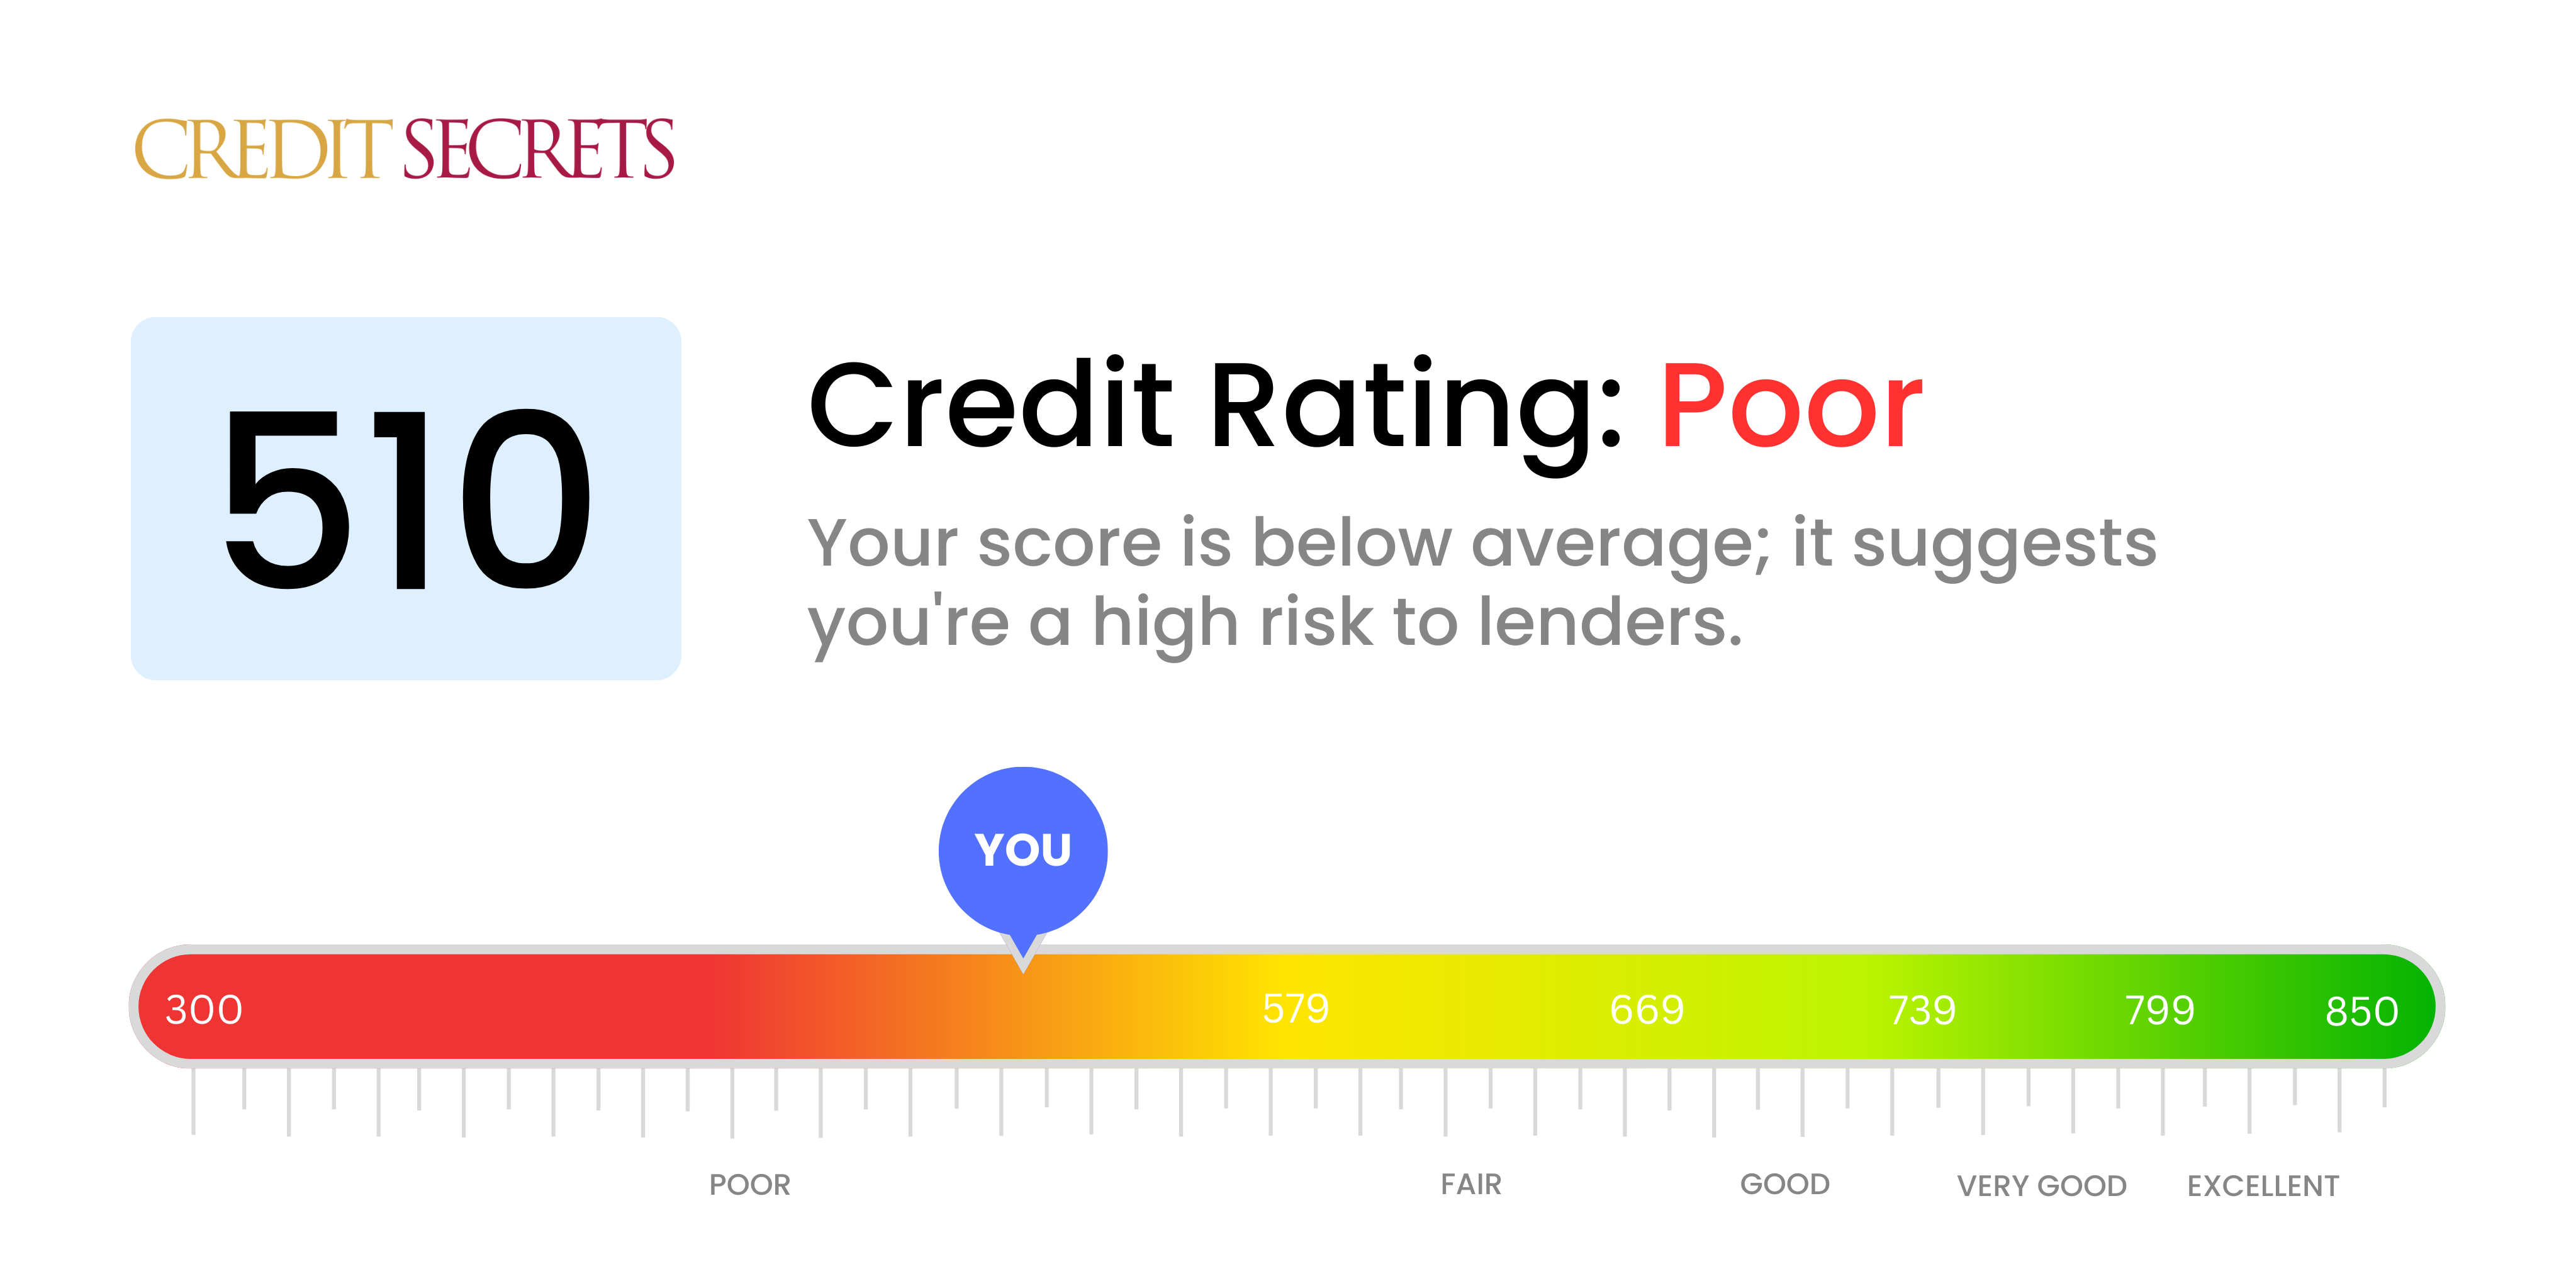 Is 510 a good credit score?